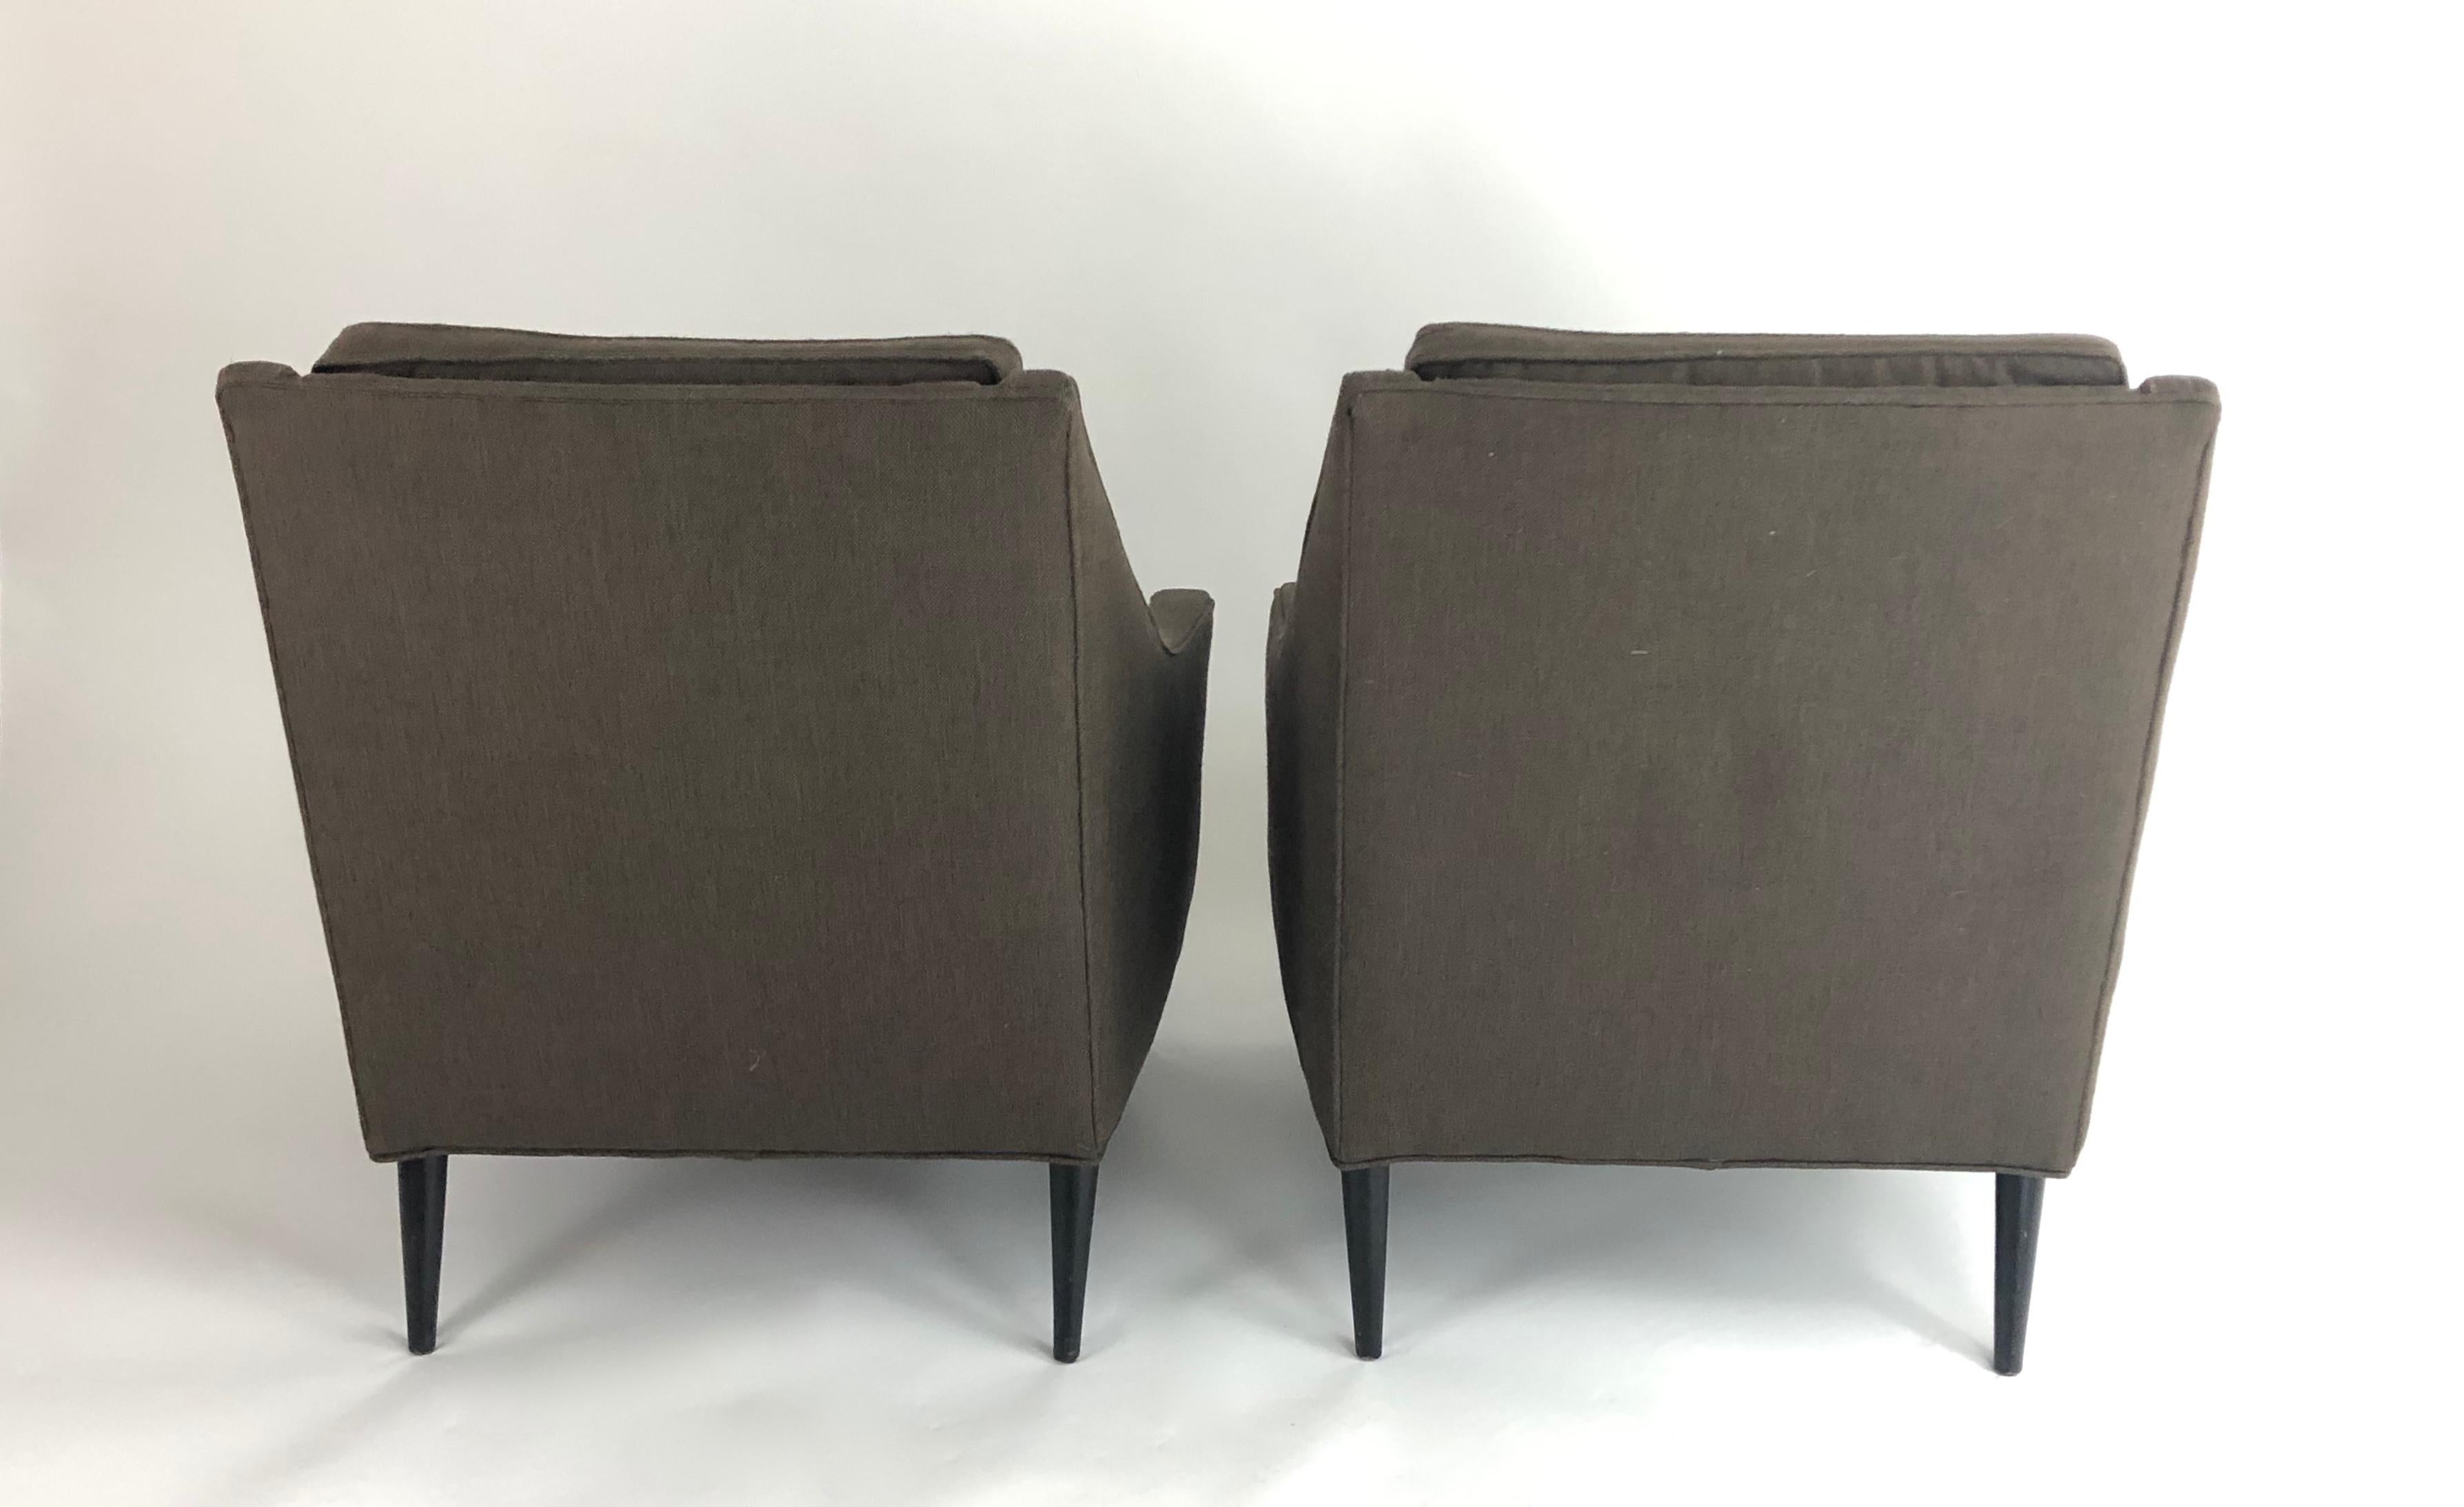 Ebonized Pair of Mid-Century Modern Upholstered Lounge Chairs